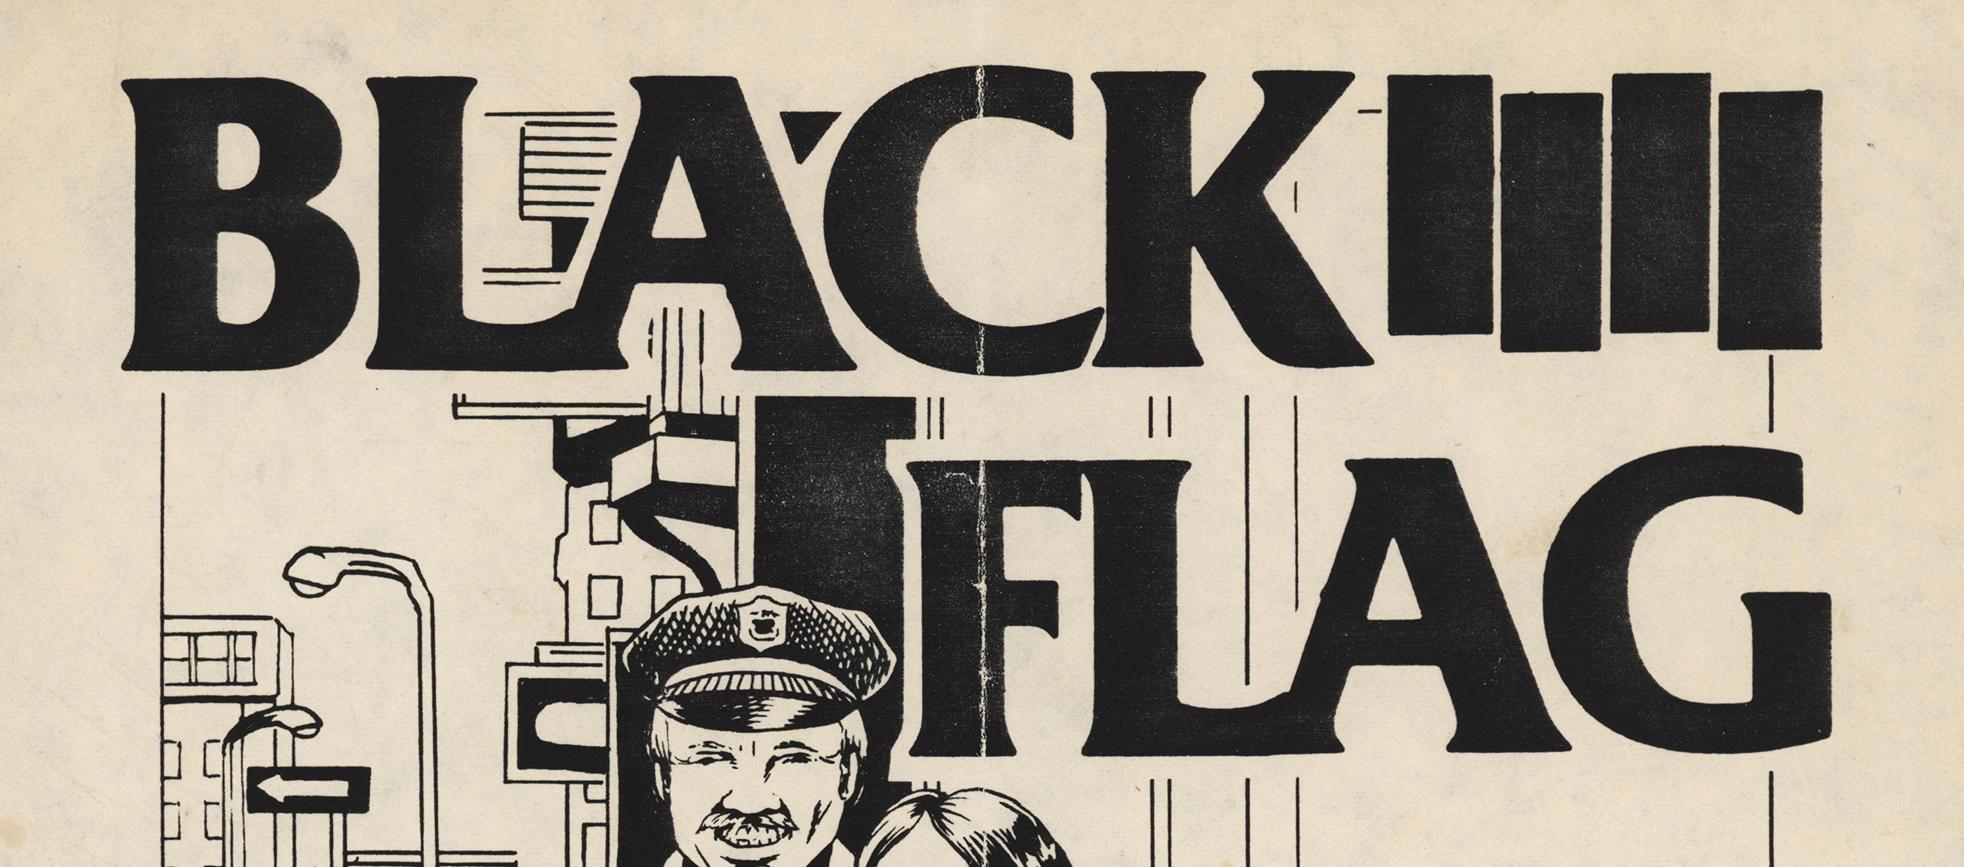 Raymond Pettibon: Rare early Black Flag flyer:
Original punk flyer / handbill illustrated by Pettibon for a gig by Black Flag at The Mabuhay, San Francisco, CA: Fri Oct 3, 1980. 

Offset-printed 11 x 8 ½ inches (28 x 21.6 cm). 
Good overall vintage